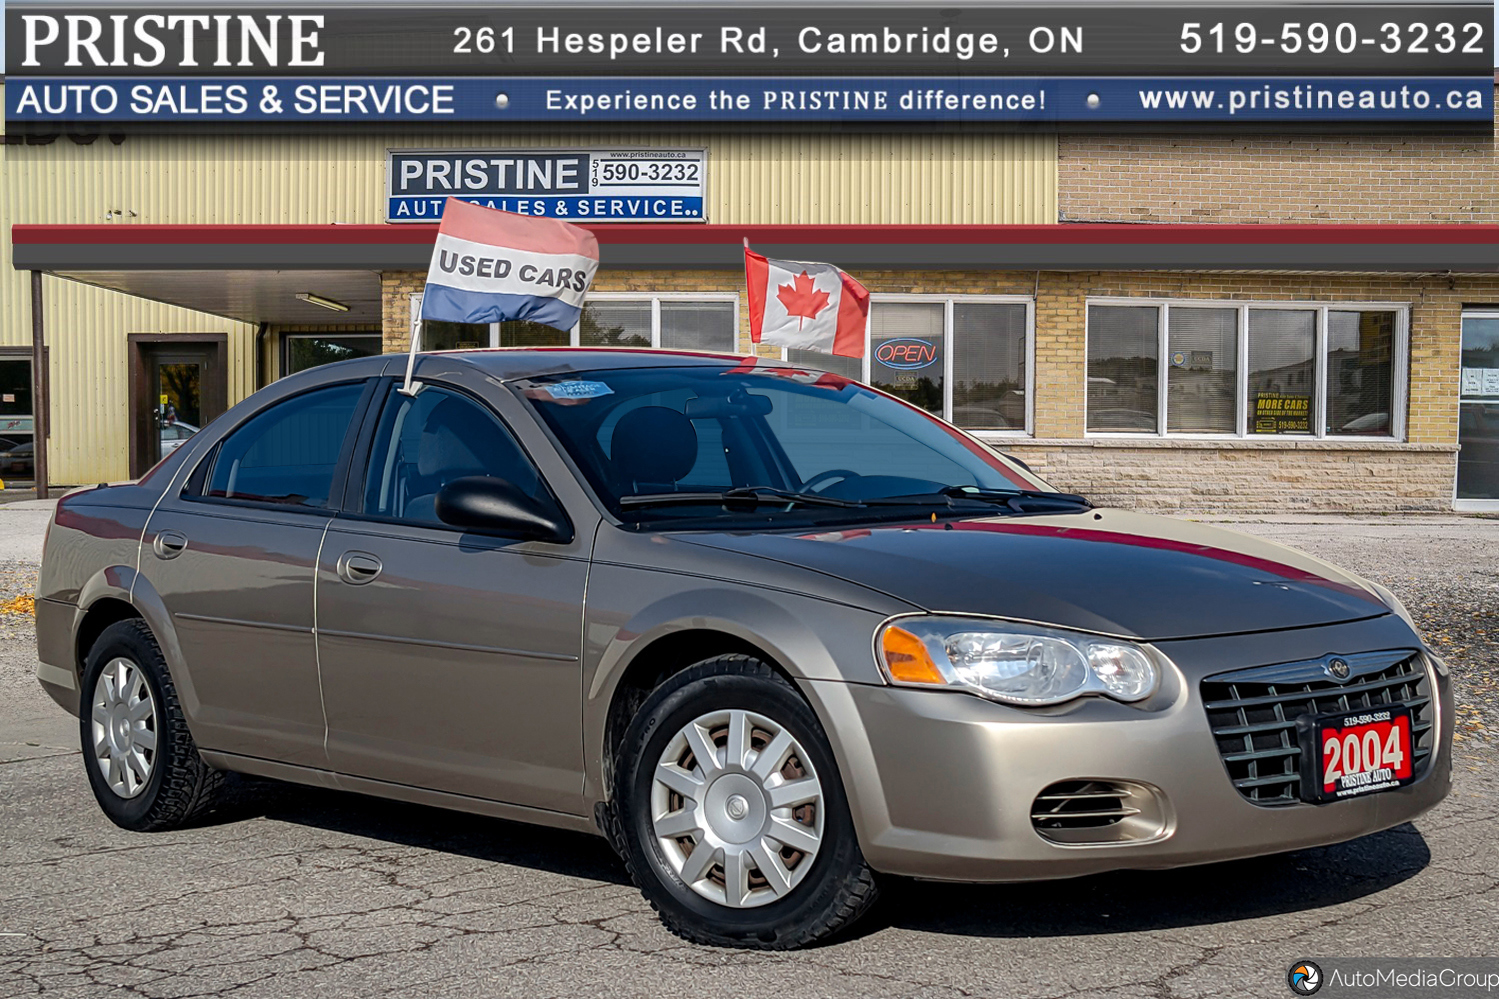 2004 Chrysler Sebring LX Only 100 km Cold A/C No Rust